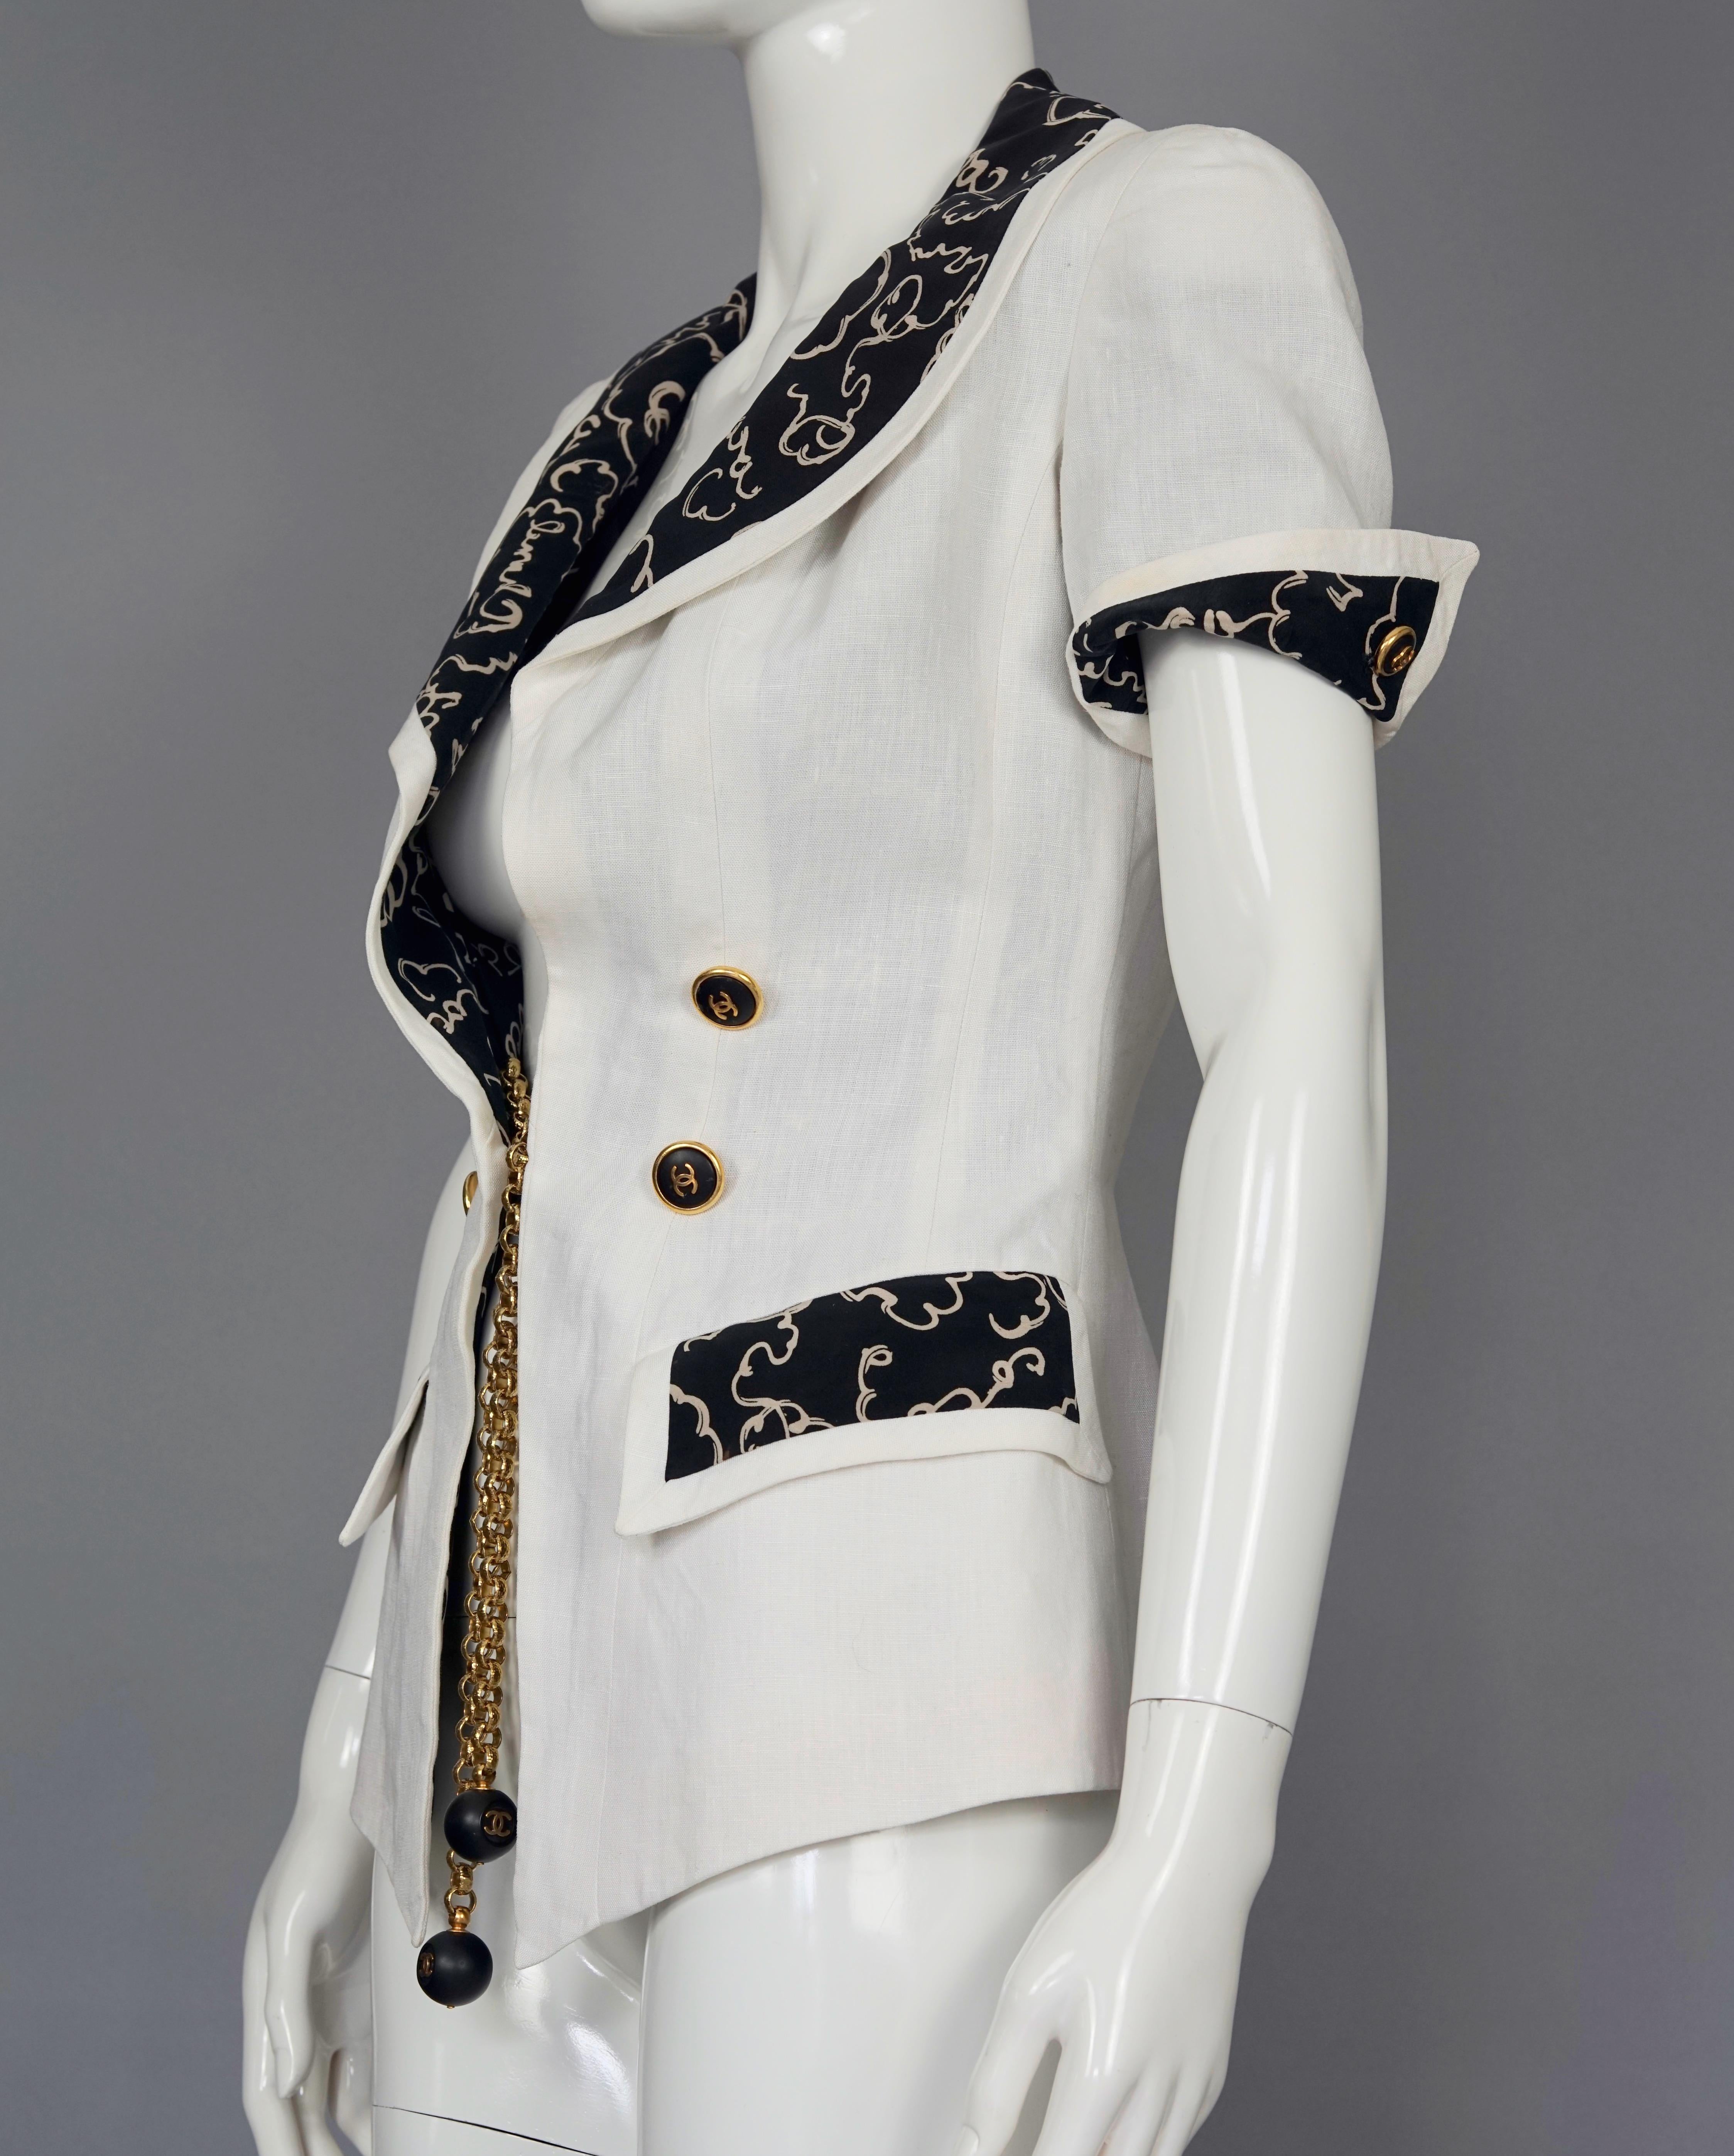 Vintage 1993 CHANEL White Linen Logo Silk Lining CC Chain Button Jacket
From 1993 Printemps Collection

Measurements taken laid flat, please double bust, waist and hips:
Shoulder: 14.96 inches (38 cm)
Sleeves: 7.08 inches (18 cm)
Bust: 16.92 inches